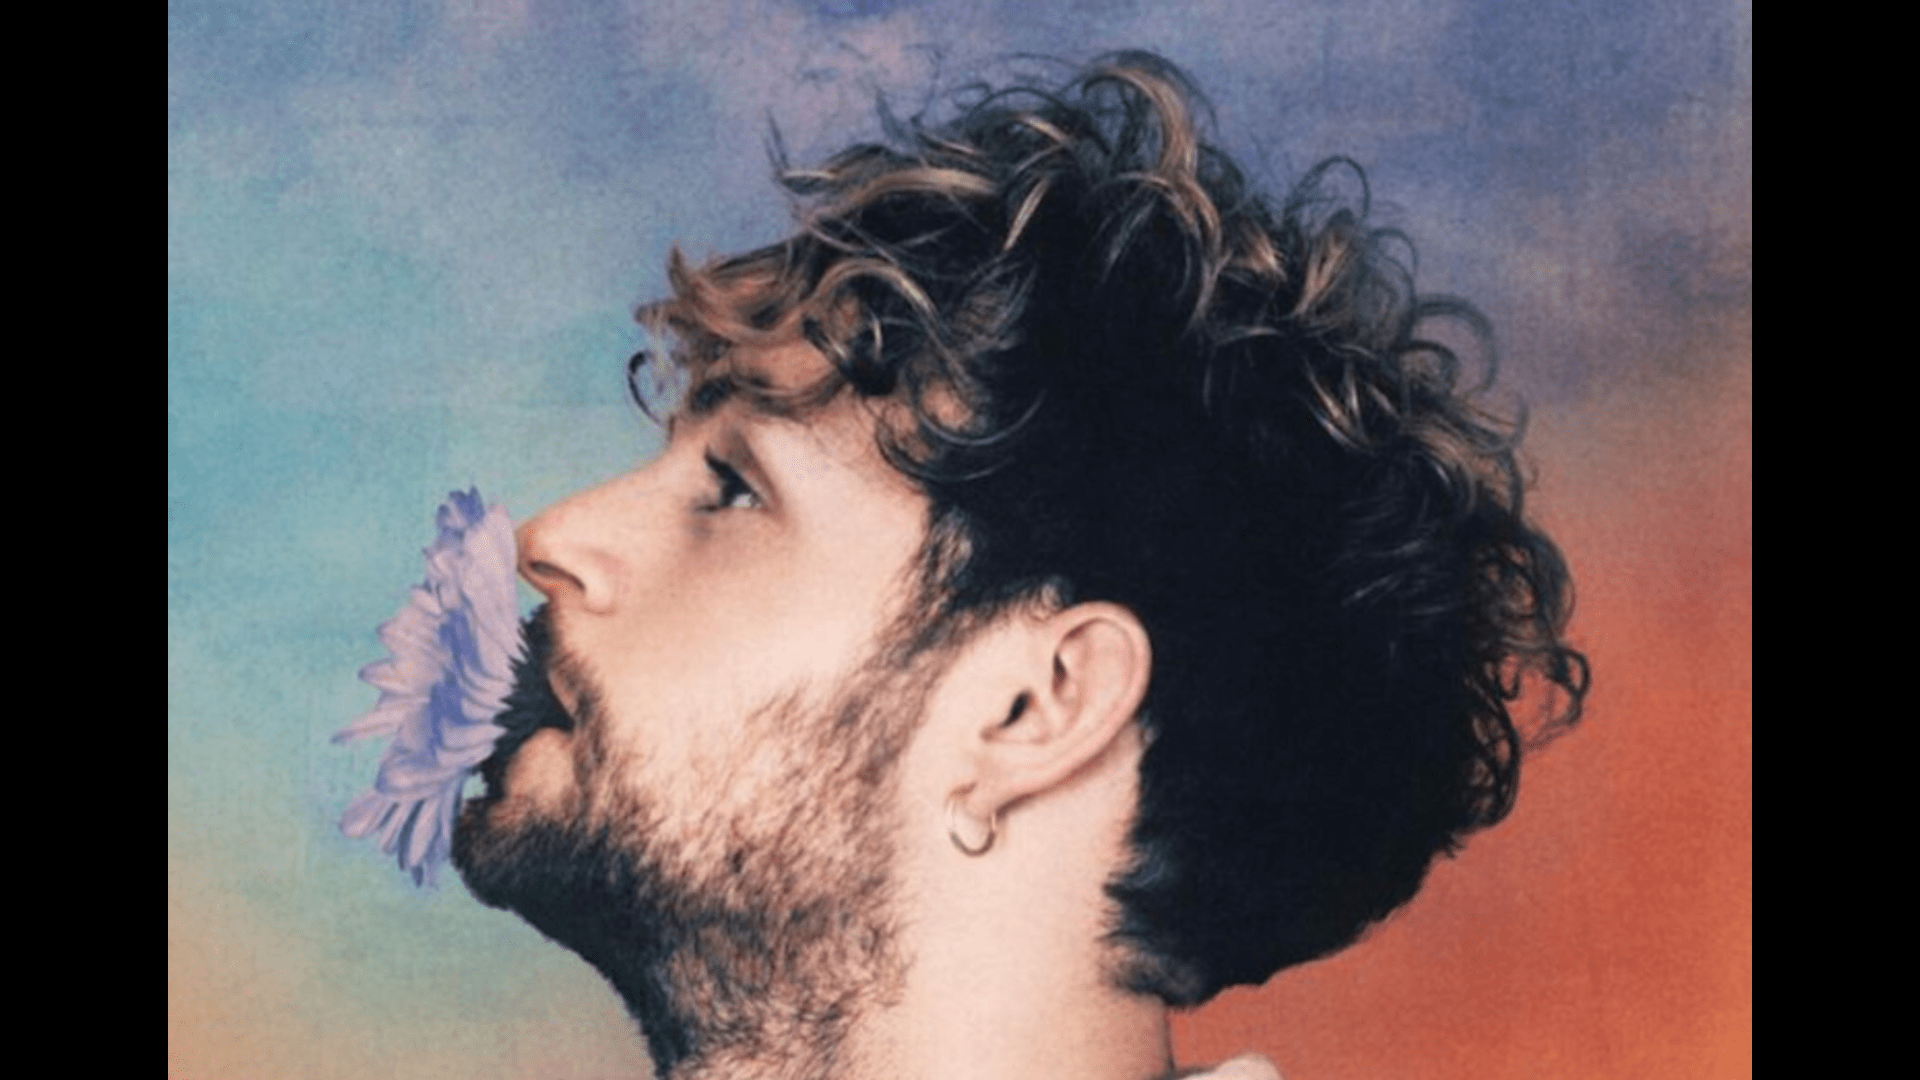 ”singer-tom-grennan-hospitalized-after-a-robbery-attack”